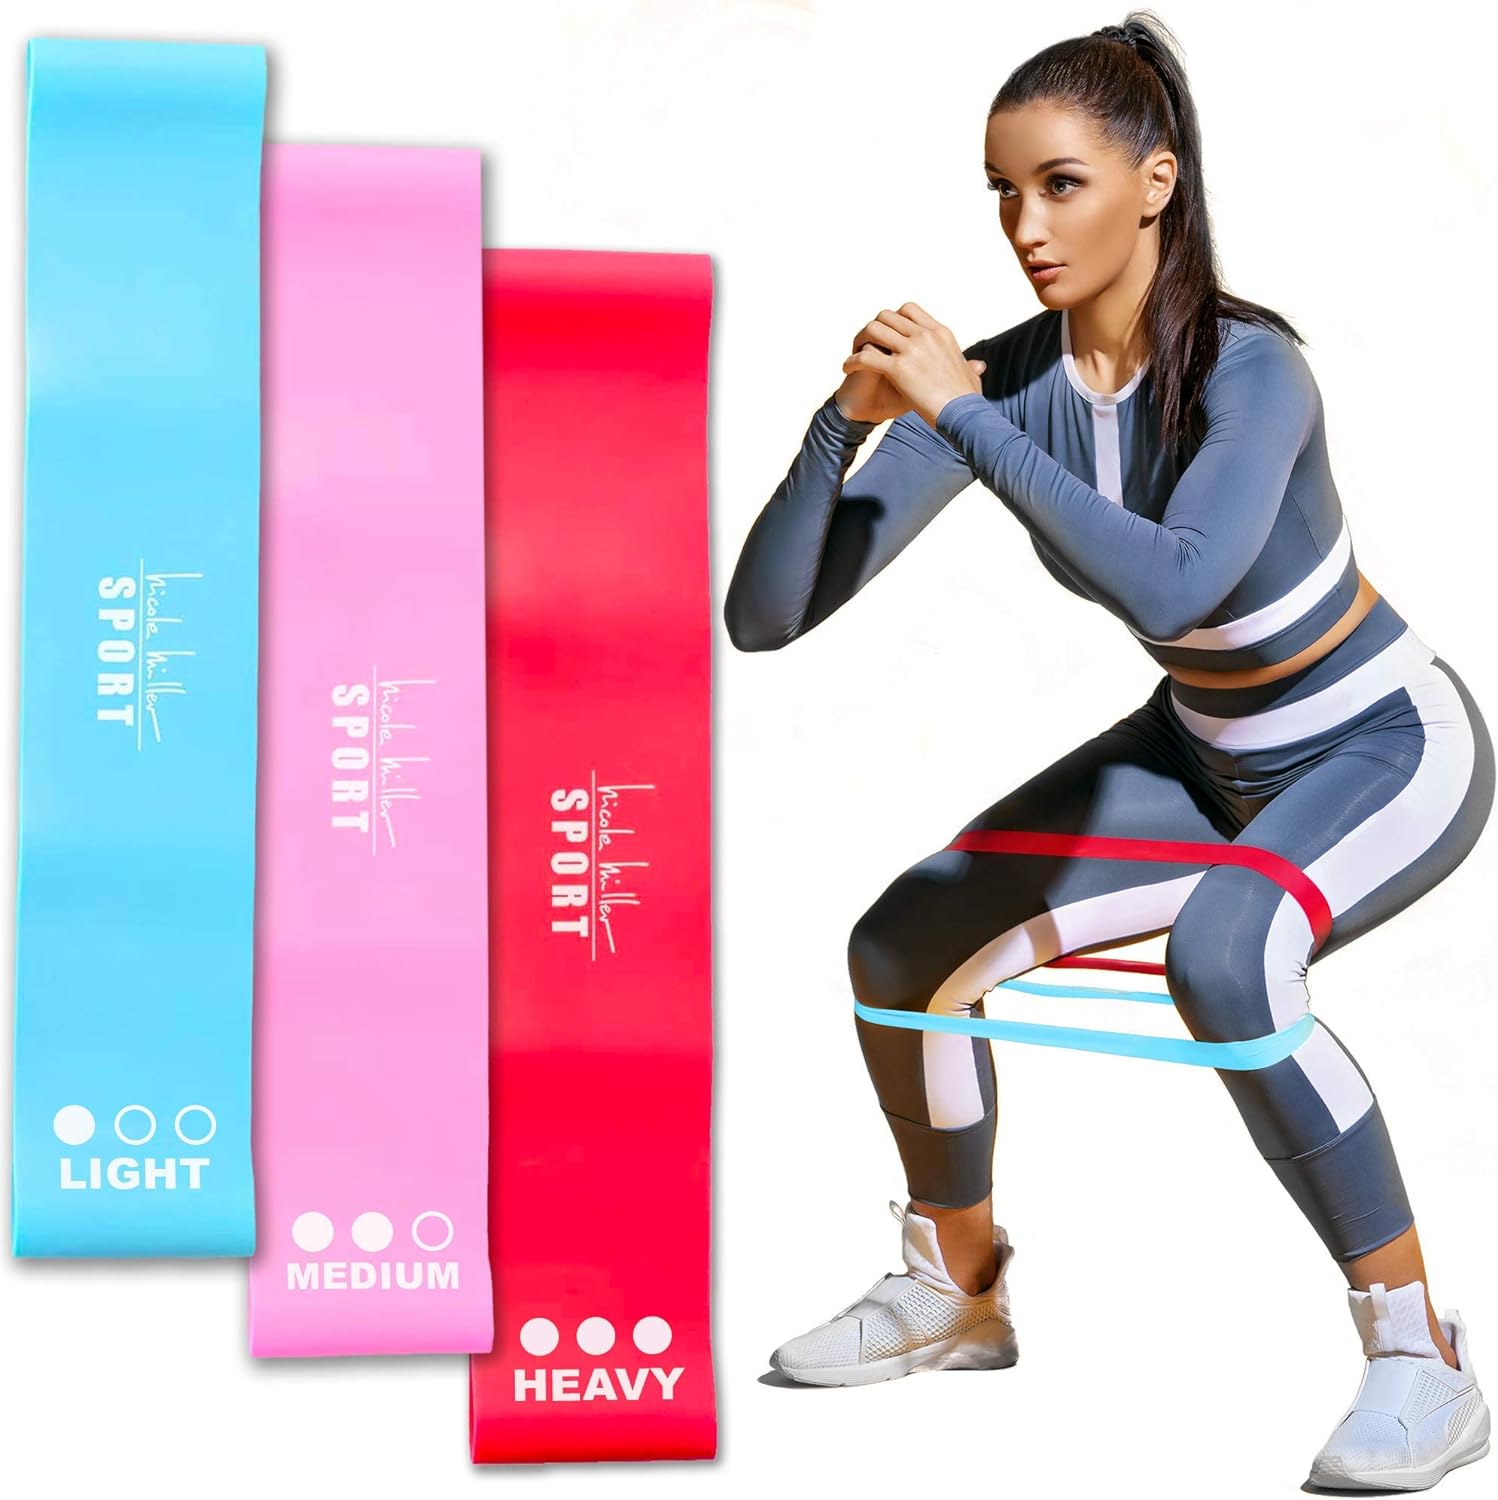 Nicole Miller Resistance Bands Set Exercise Workout Bands Loops, 3 Pack Set for Booty or Legs 3X Resistance Levels